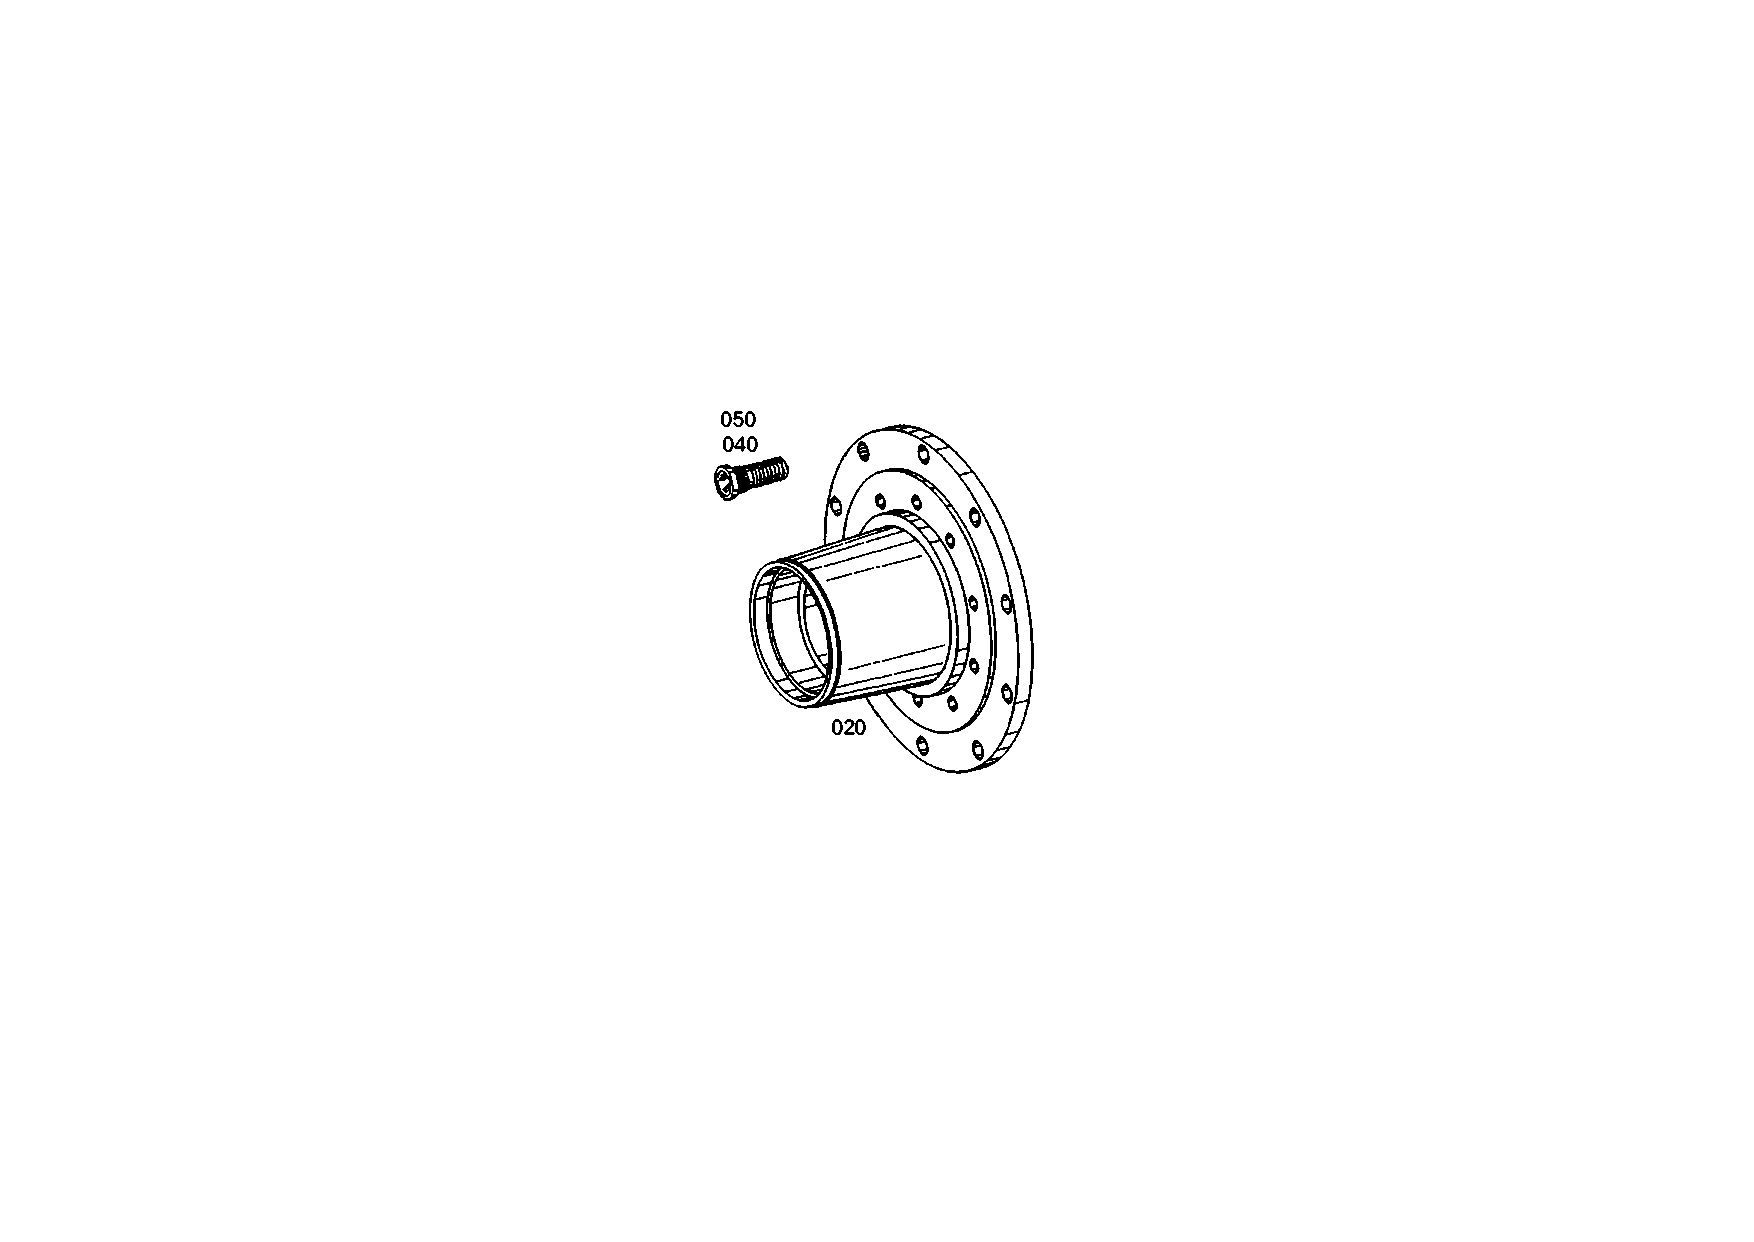 drawing for E. N. M. T. P. / CPG (520304008) - WHEEL STUD